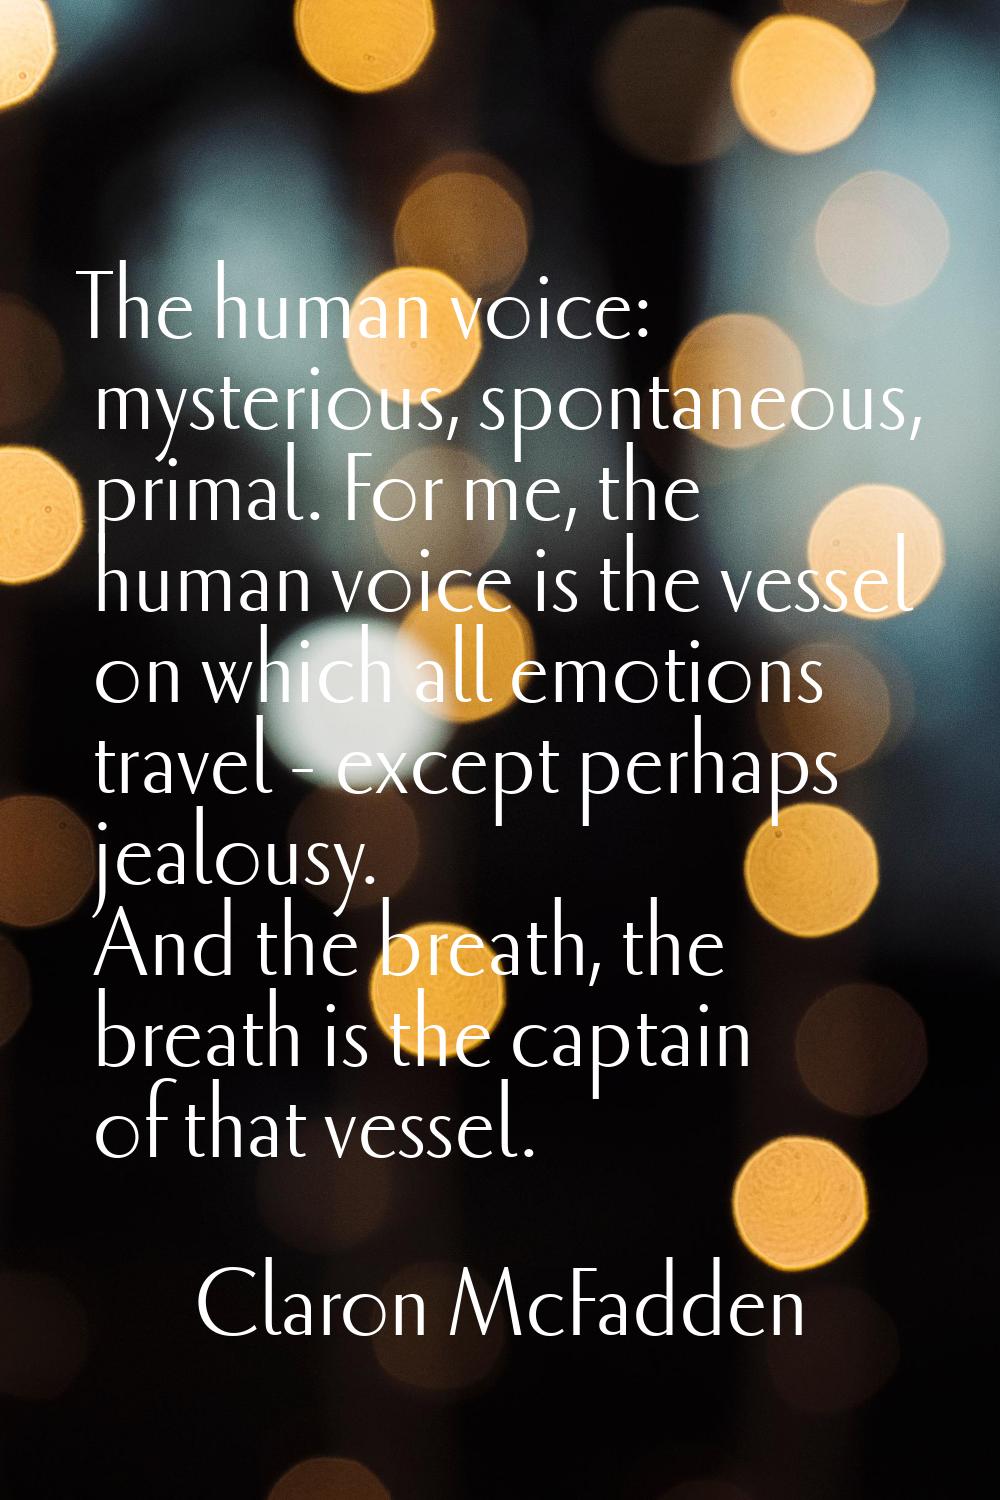 The human voice: mysterious, spontaneous, primal. For me, the human voice is the vessel on which al